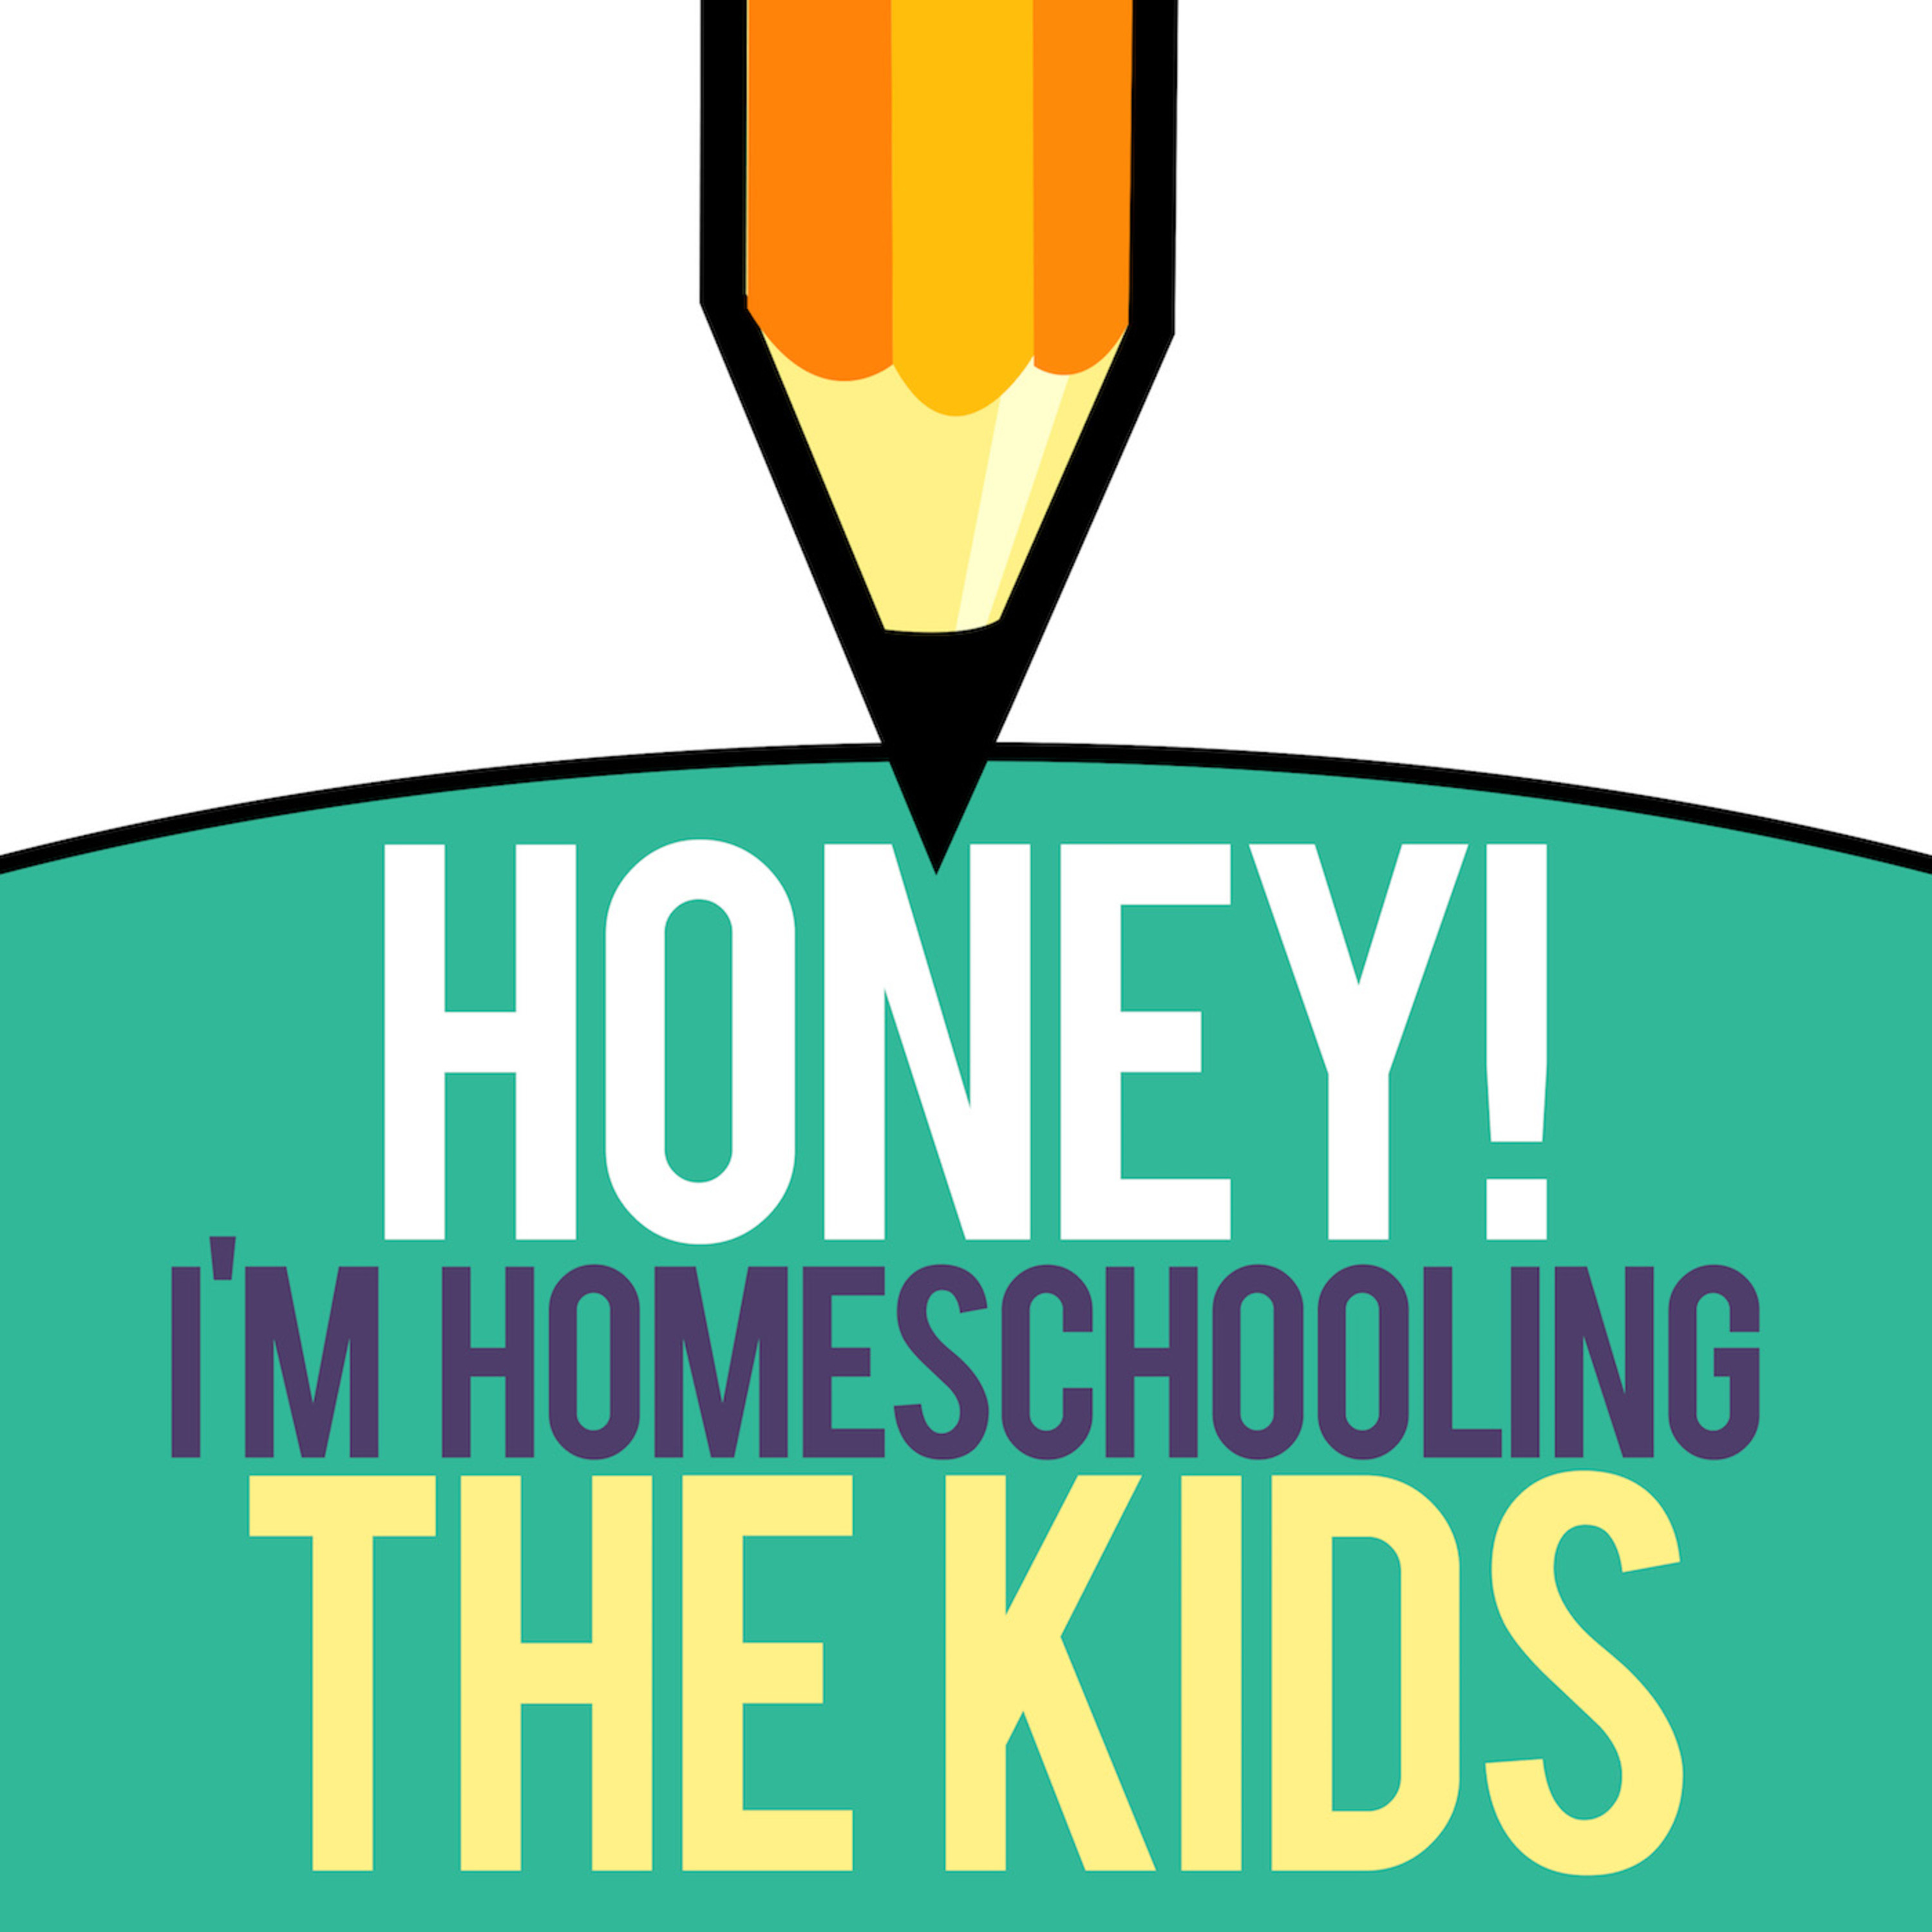 From The Soviet Union To Homeschooling